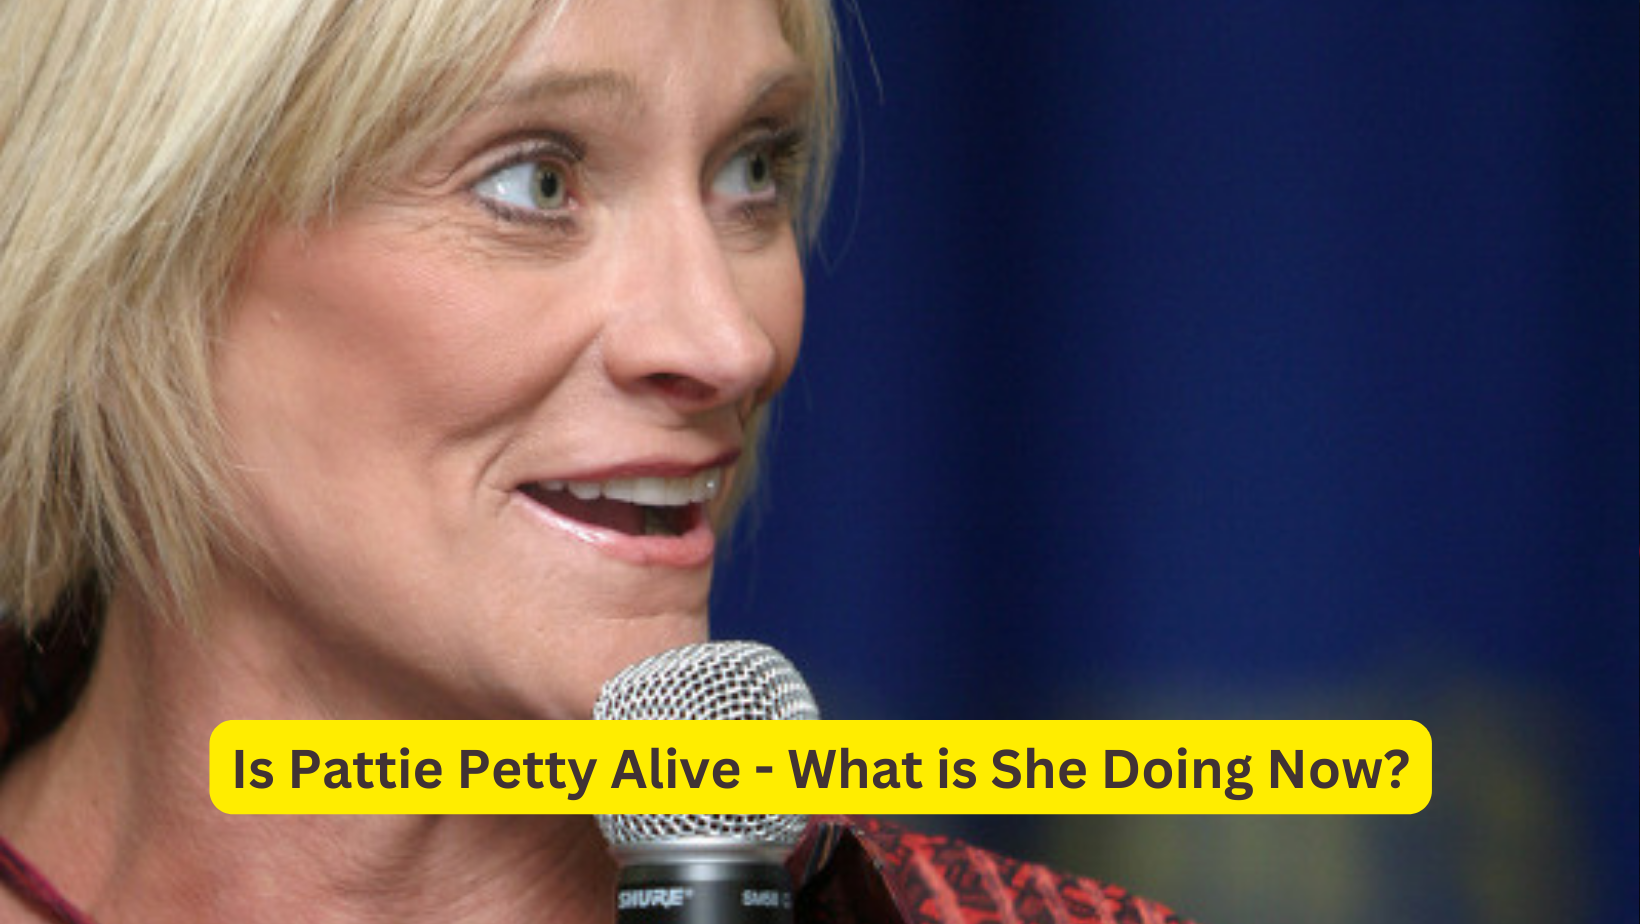 Is Pattie Petty Alive - What is She Doing Now?